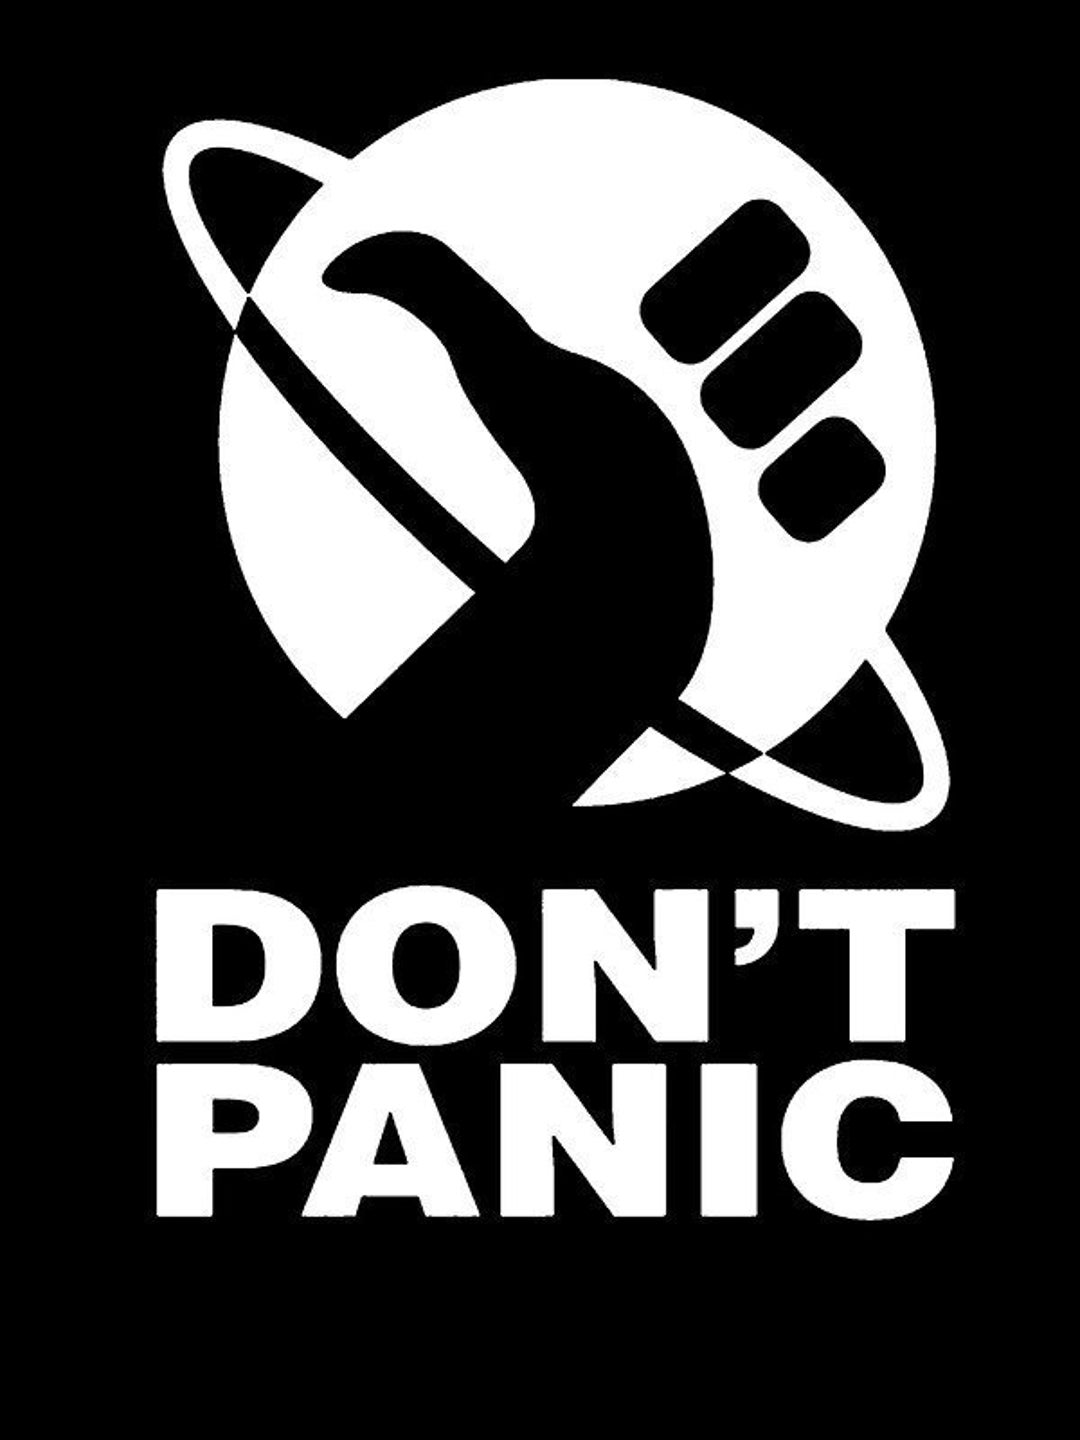 DON'T PANIC! Hitchhiker's Guide to the Galaxy (movie reaction